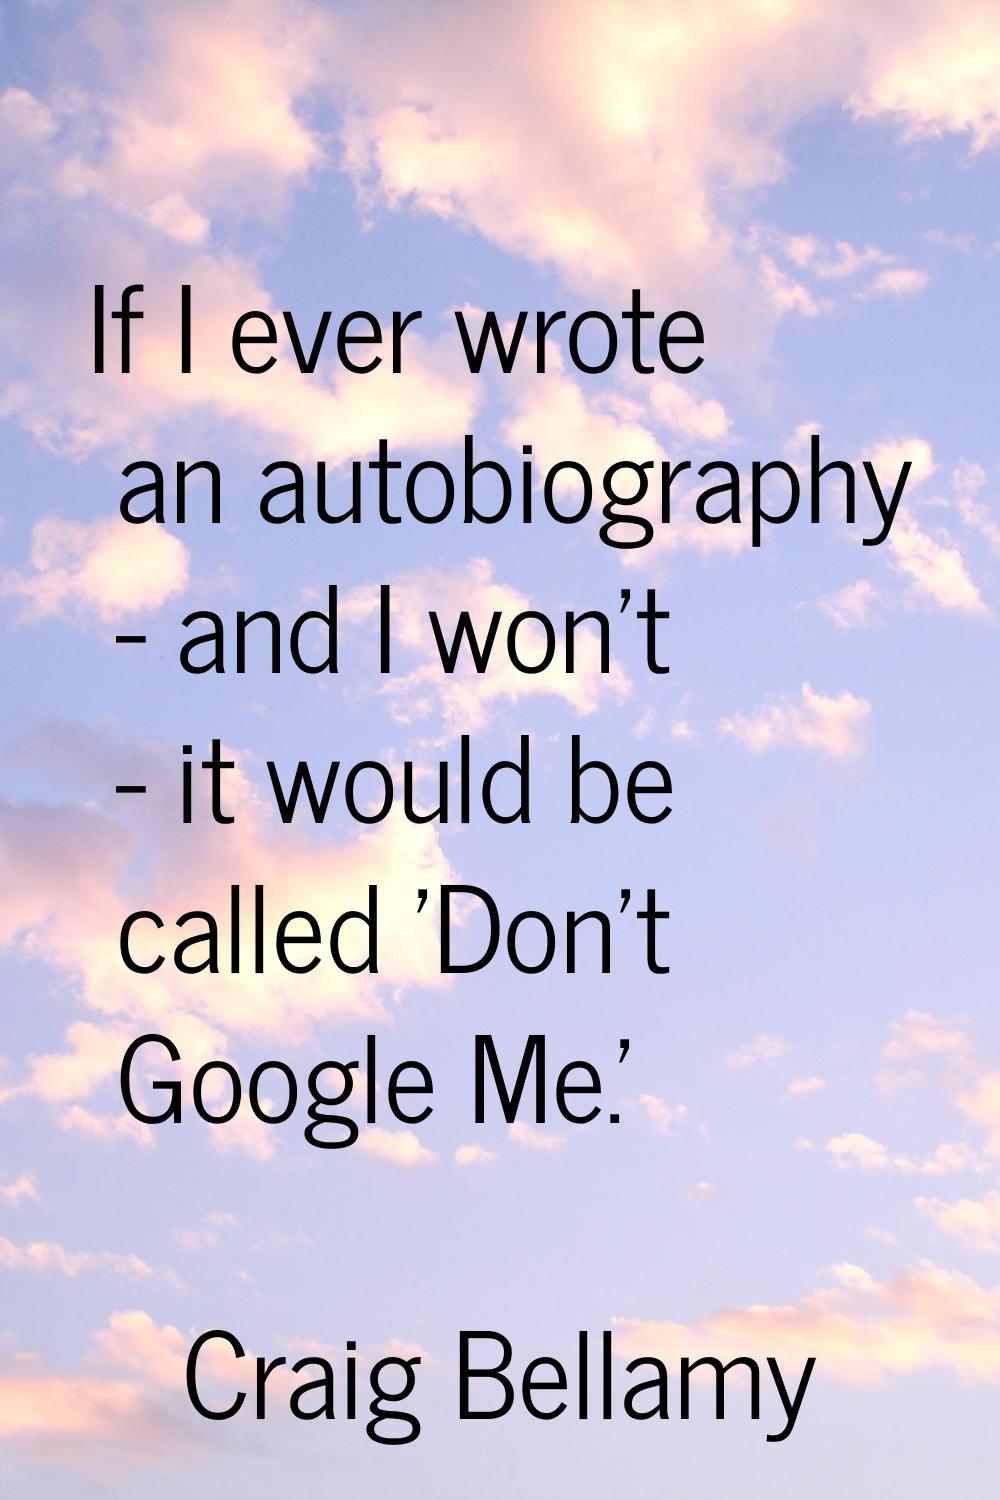 If I ever wrote an autobiography - and I won't - it would be called 'Don't Google Me.'